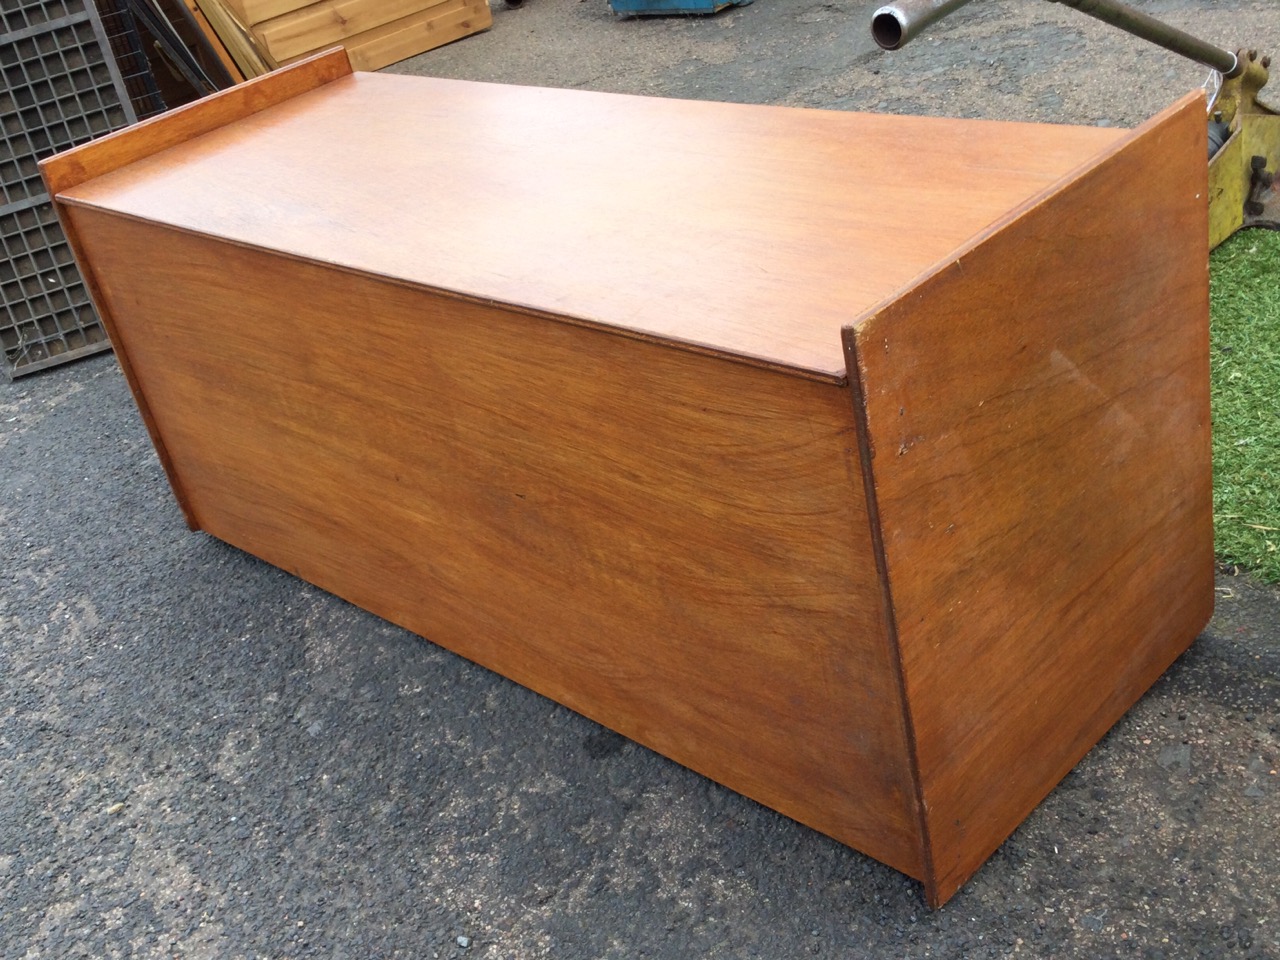 A plain contemporary blanket box bench with hinged lid. (49in x 18in x 21in) - Image 3 of 3